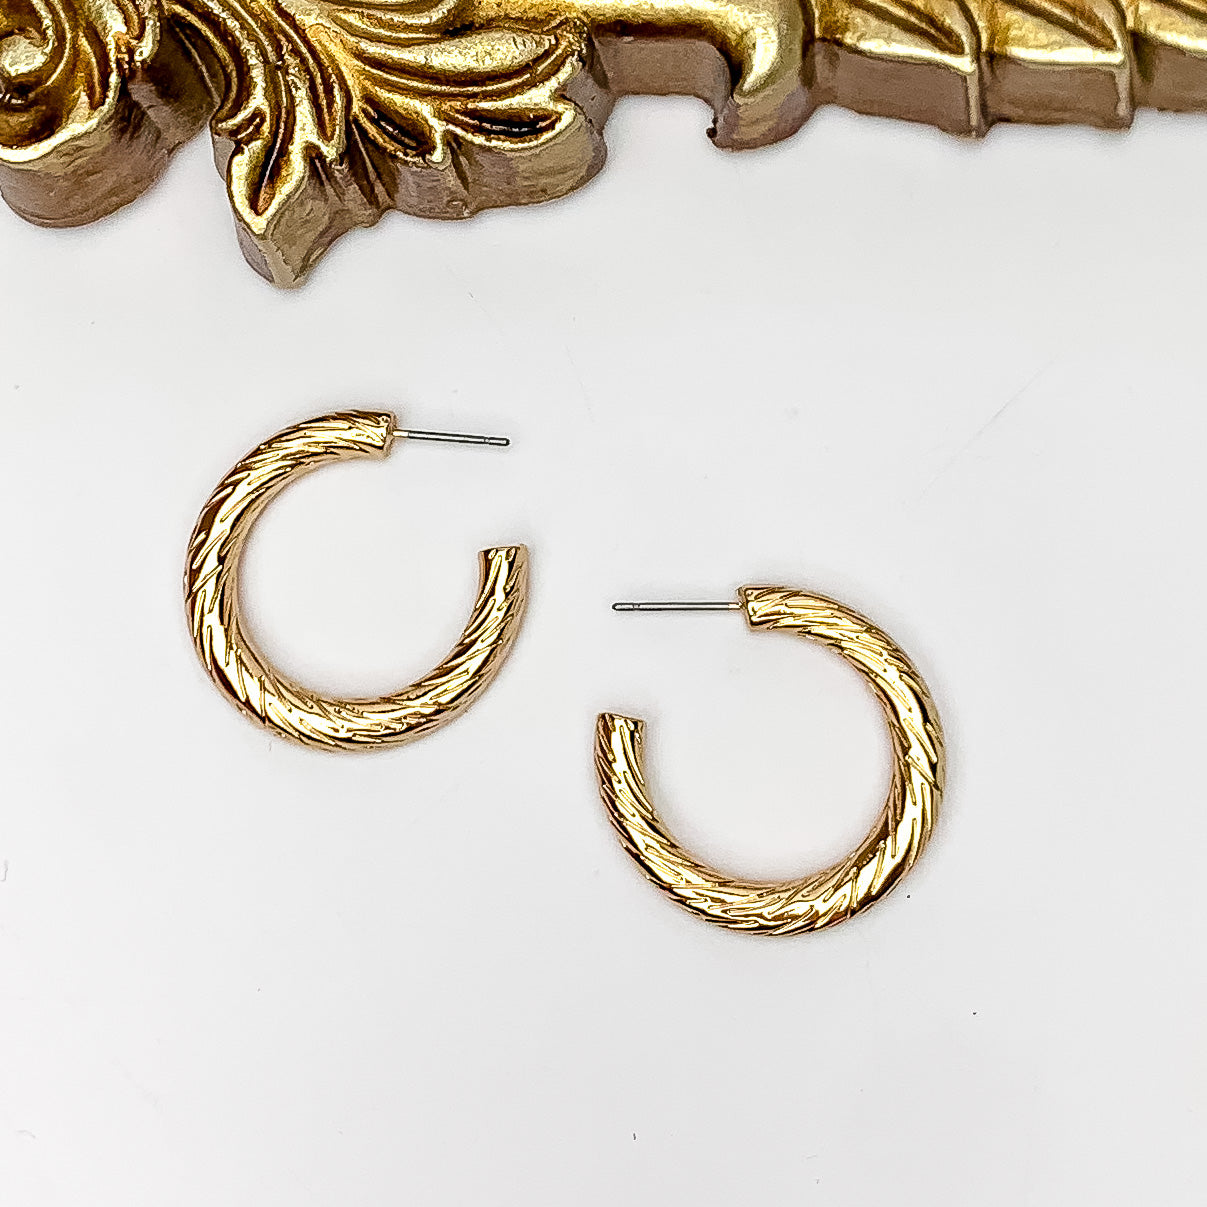 Gold Tone Small Twisted Hoop Earrings - Giddy Up Glamour Boutique